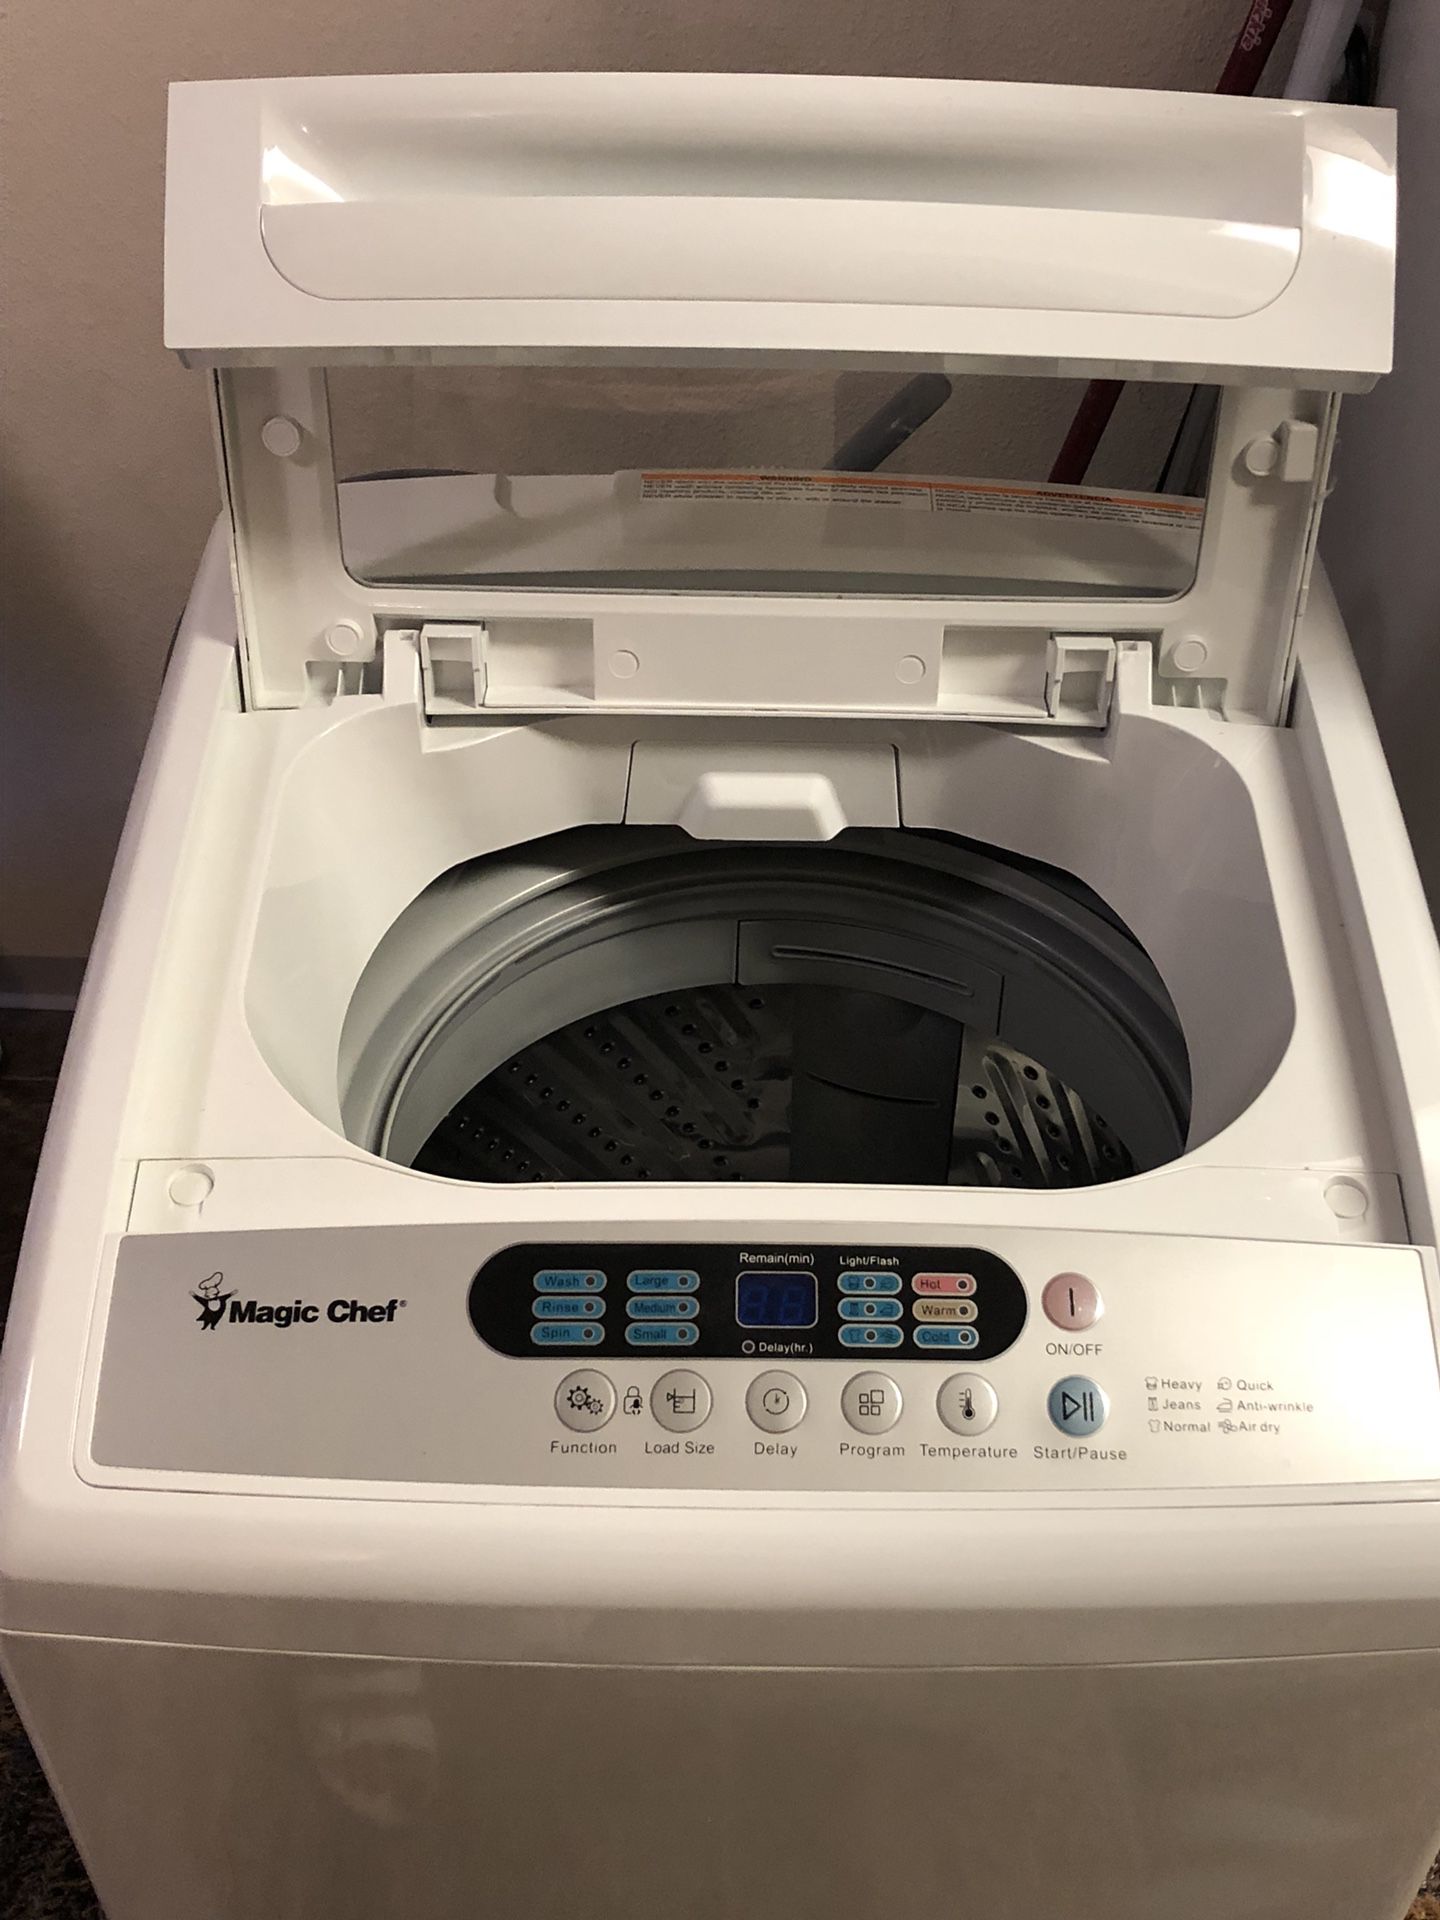 Magic chef Portable Washer 2.1 Cubic Feet (Broken Lid) for Sale in  Flushing, NY - OfferUp